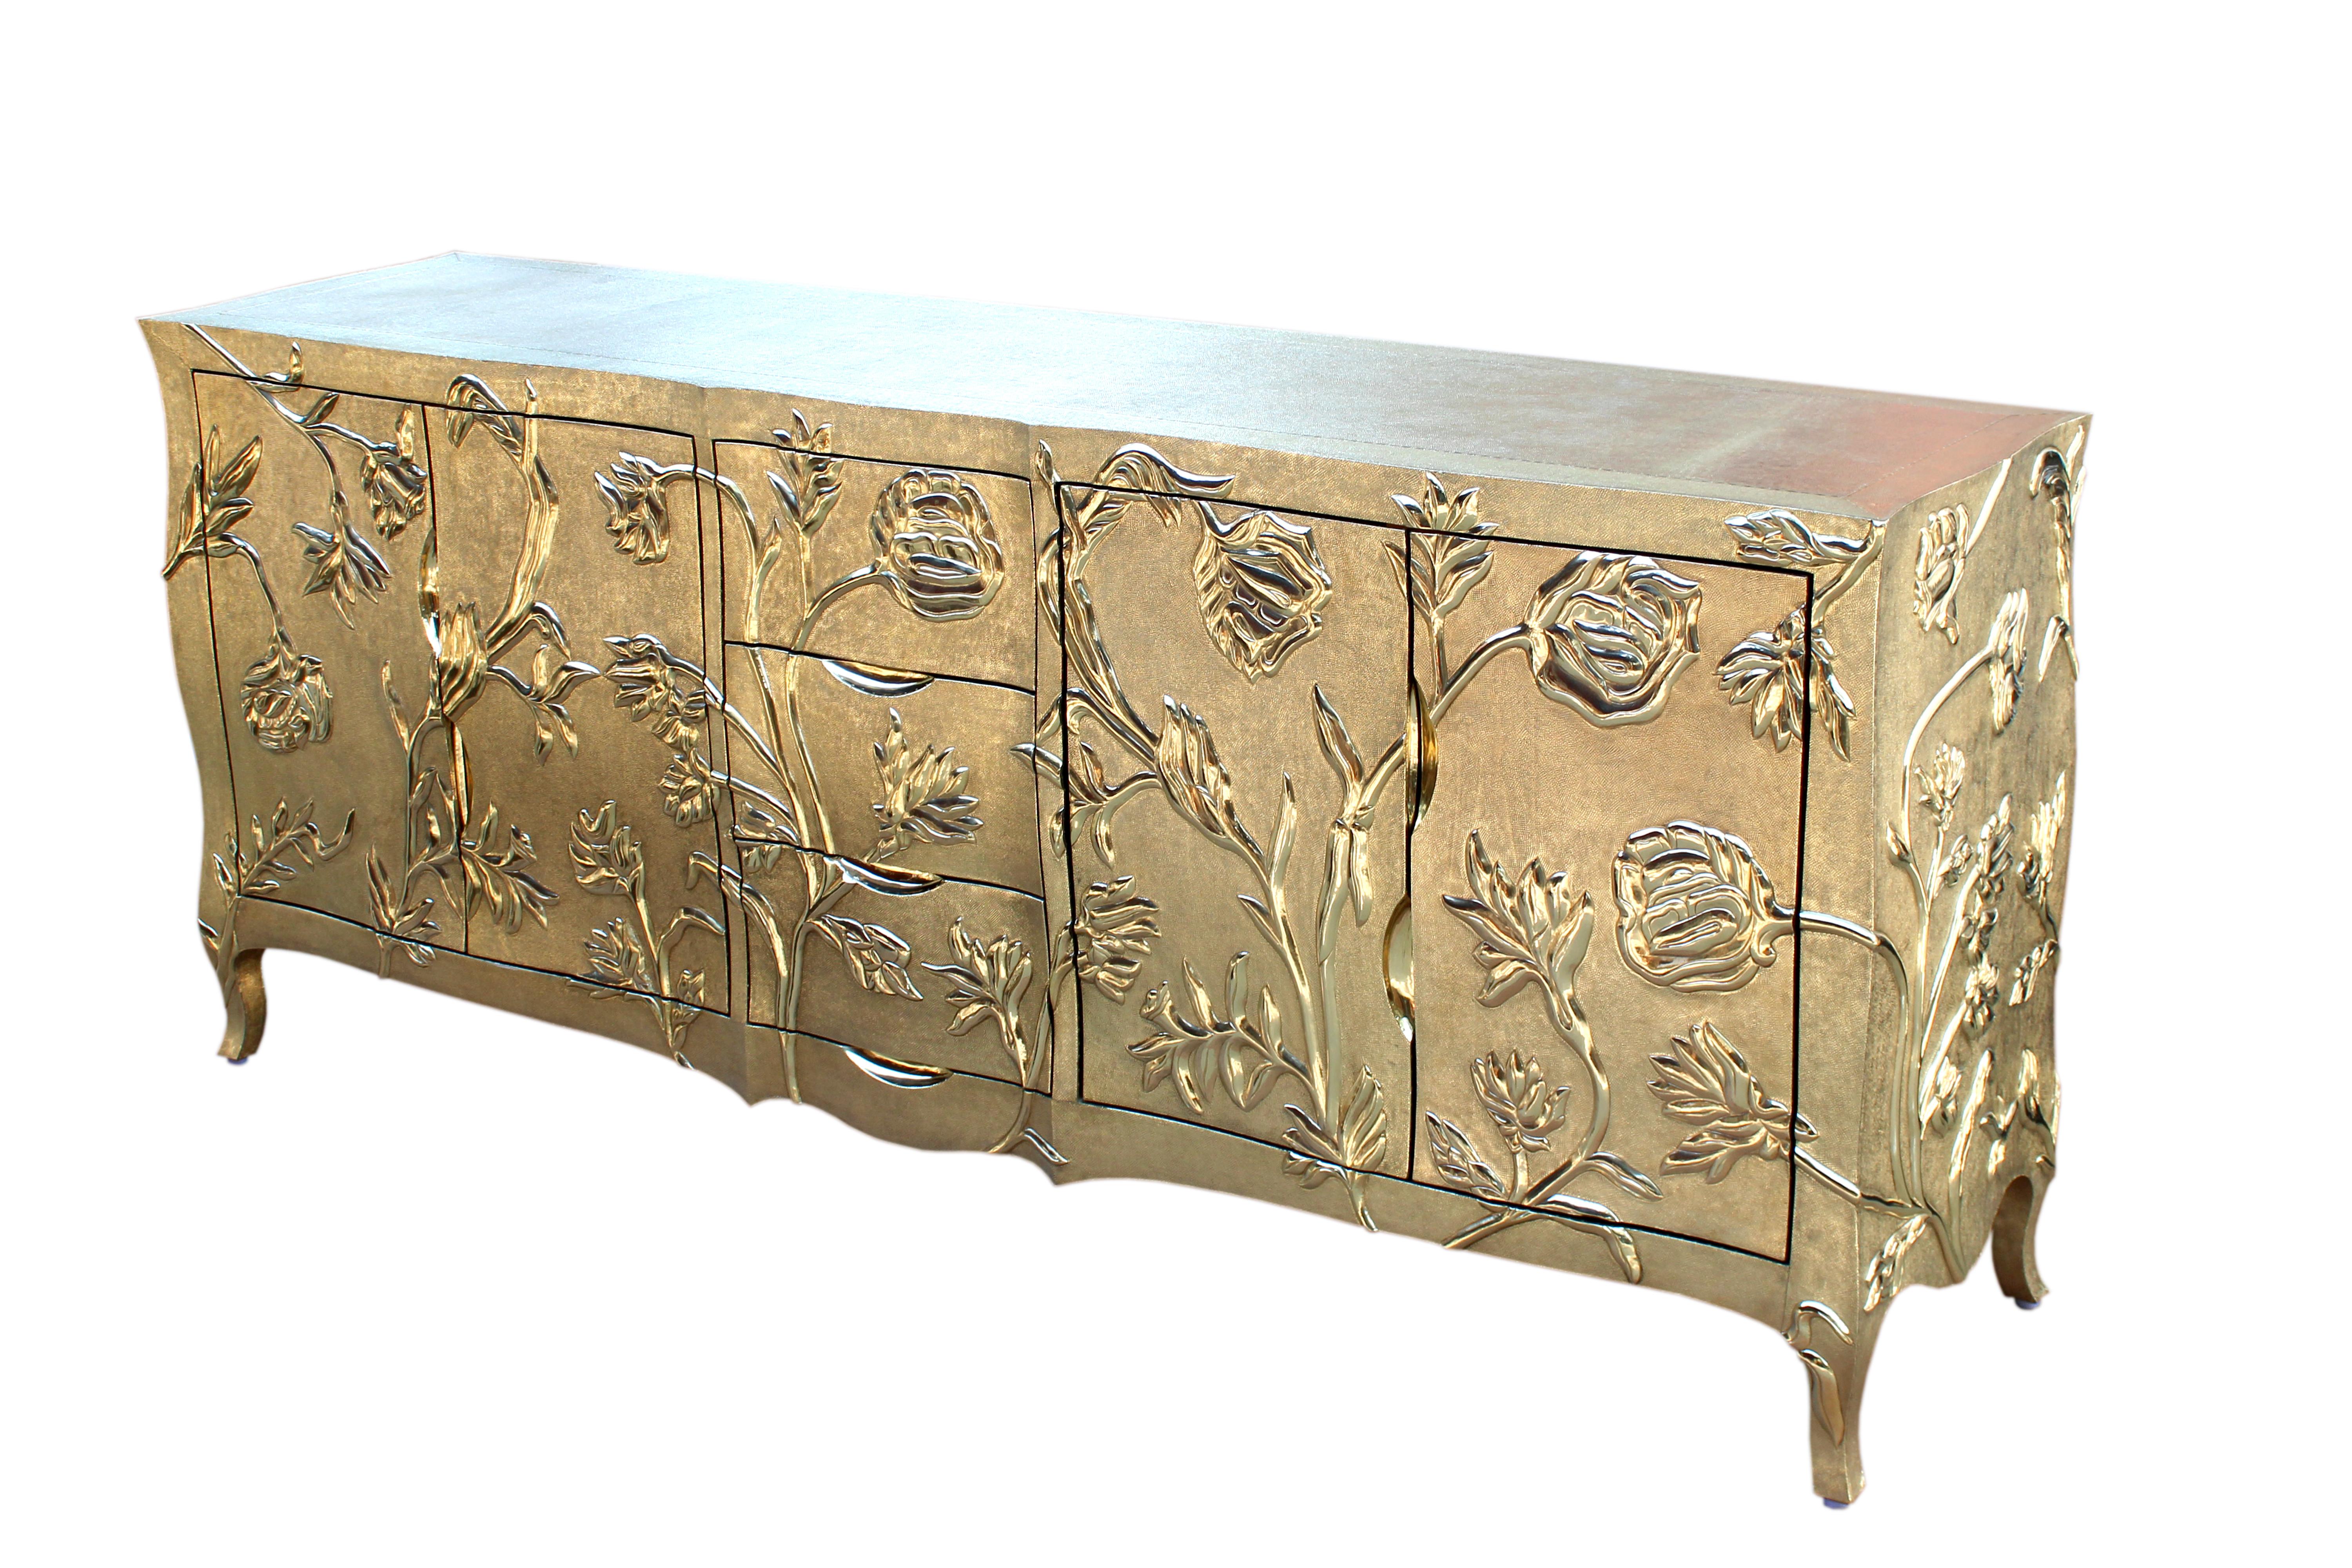 Metal Louise Floral Art Deco Credenza Fine Hammered Brass by Paul Mathieu For Sale